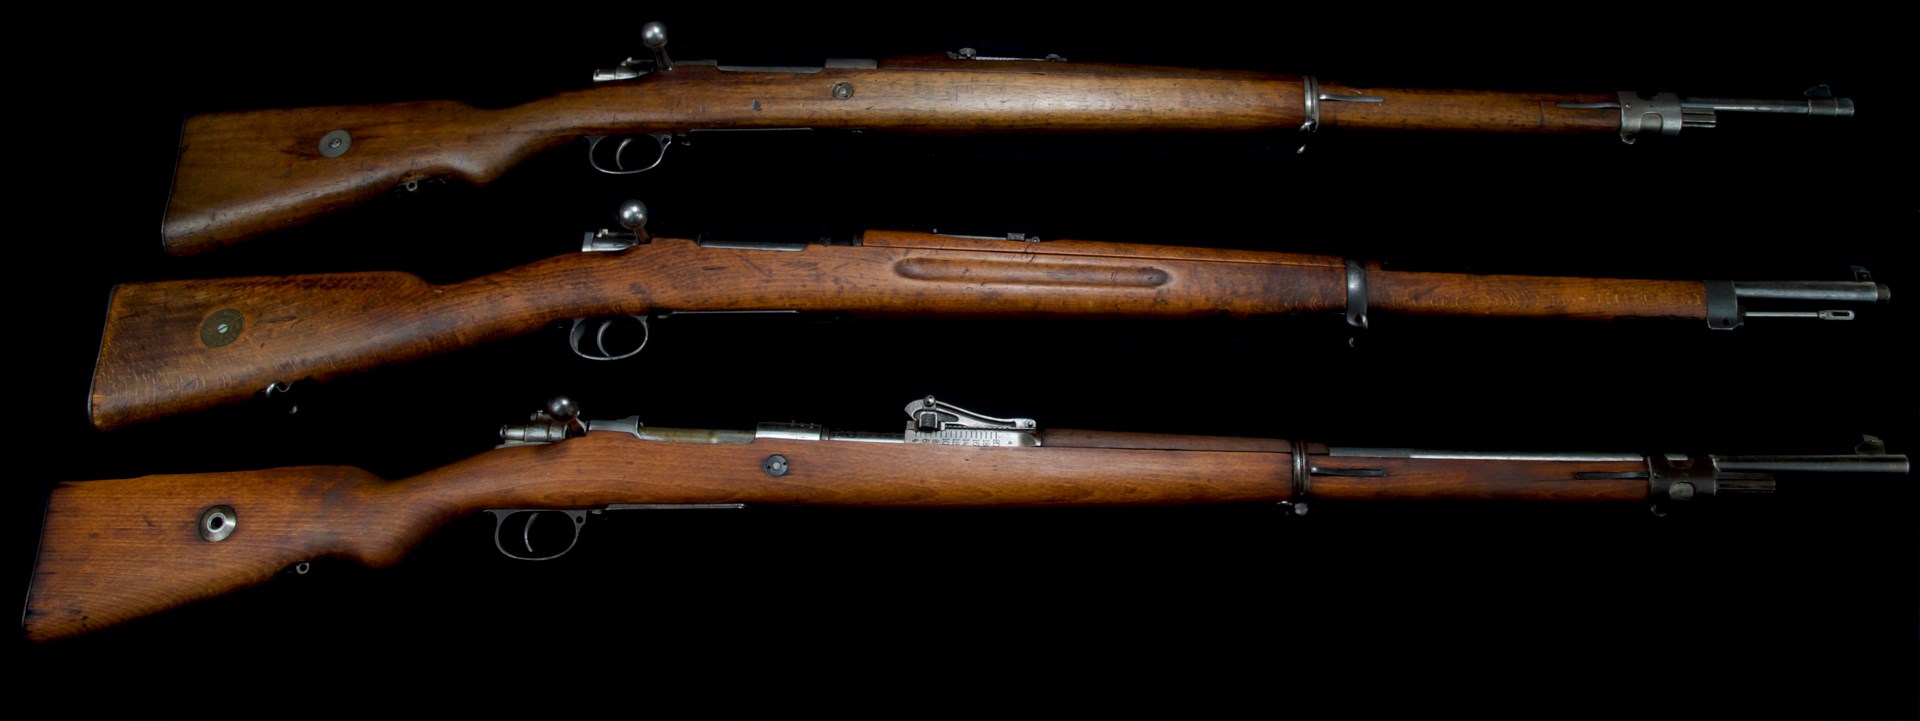 three mauser bolt-action rifles stack row